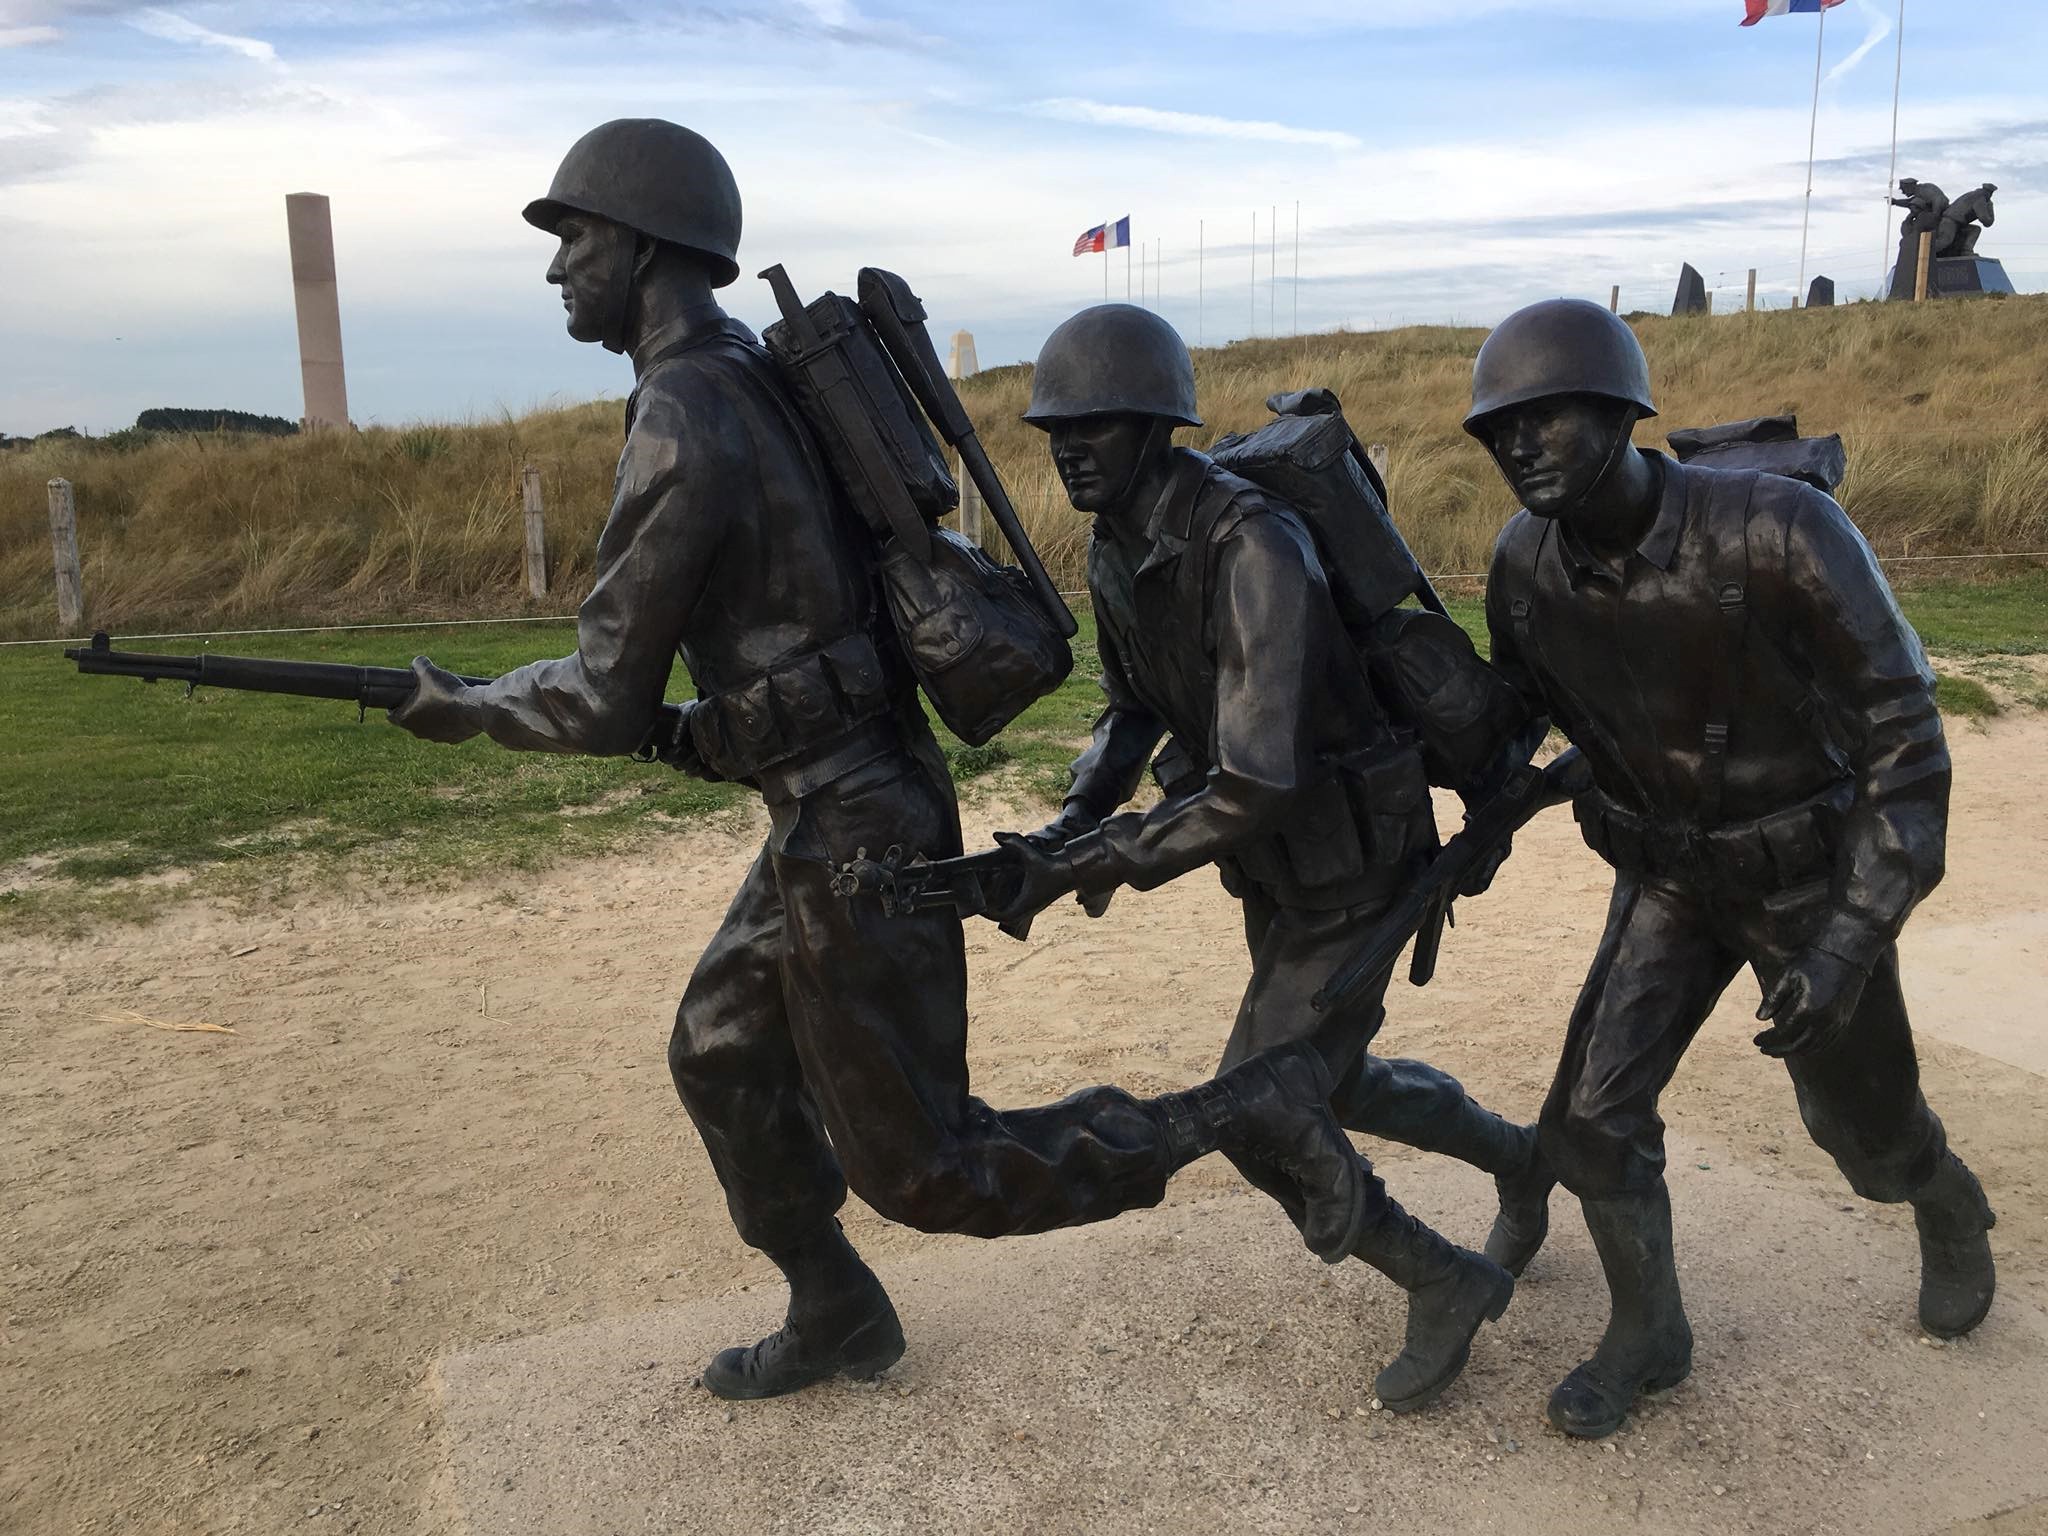 A statue of three soldiers running